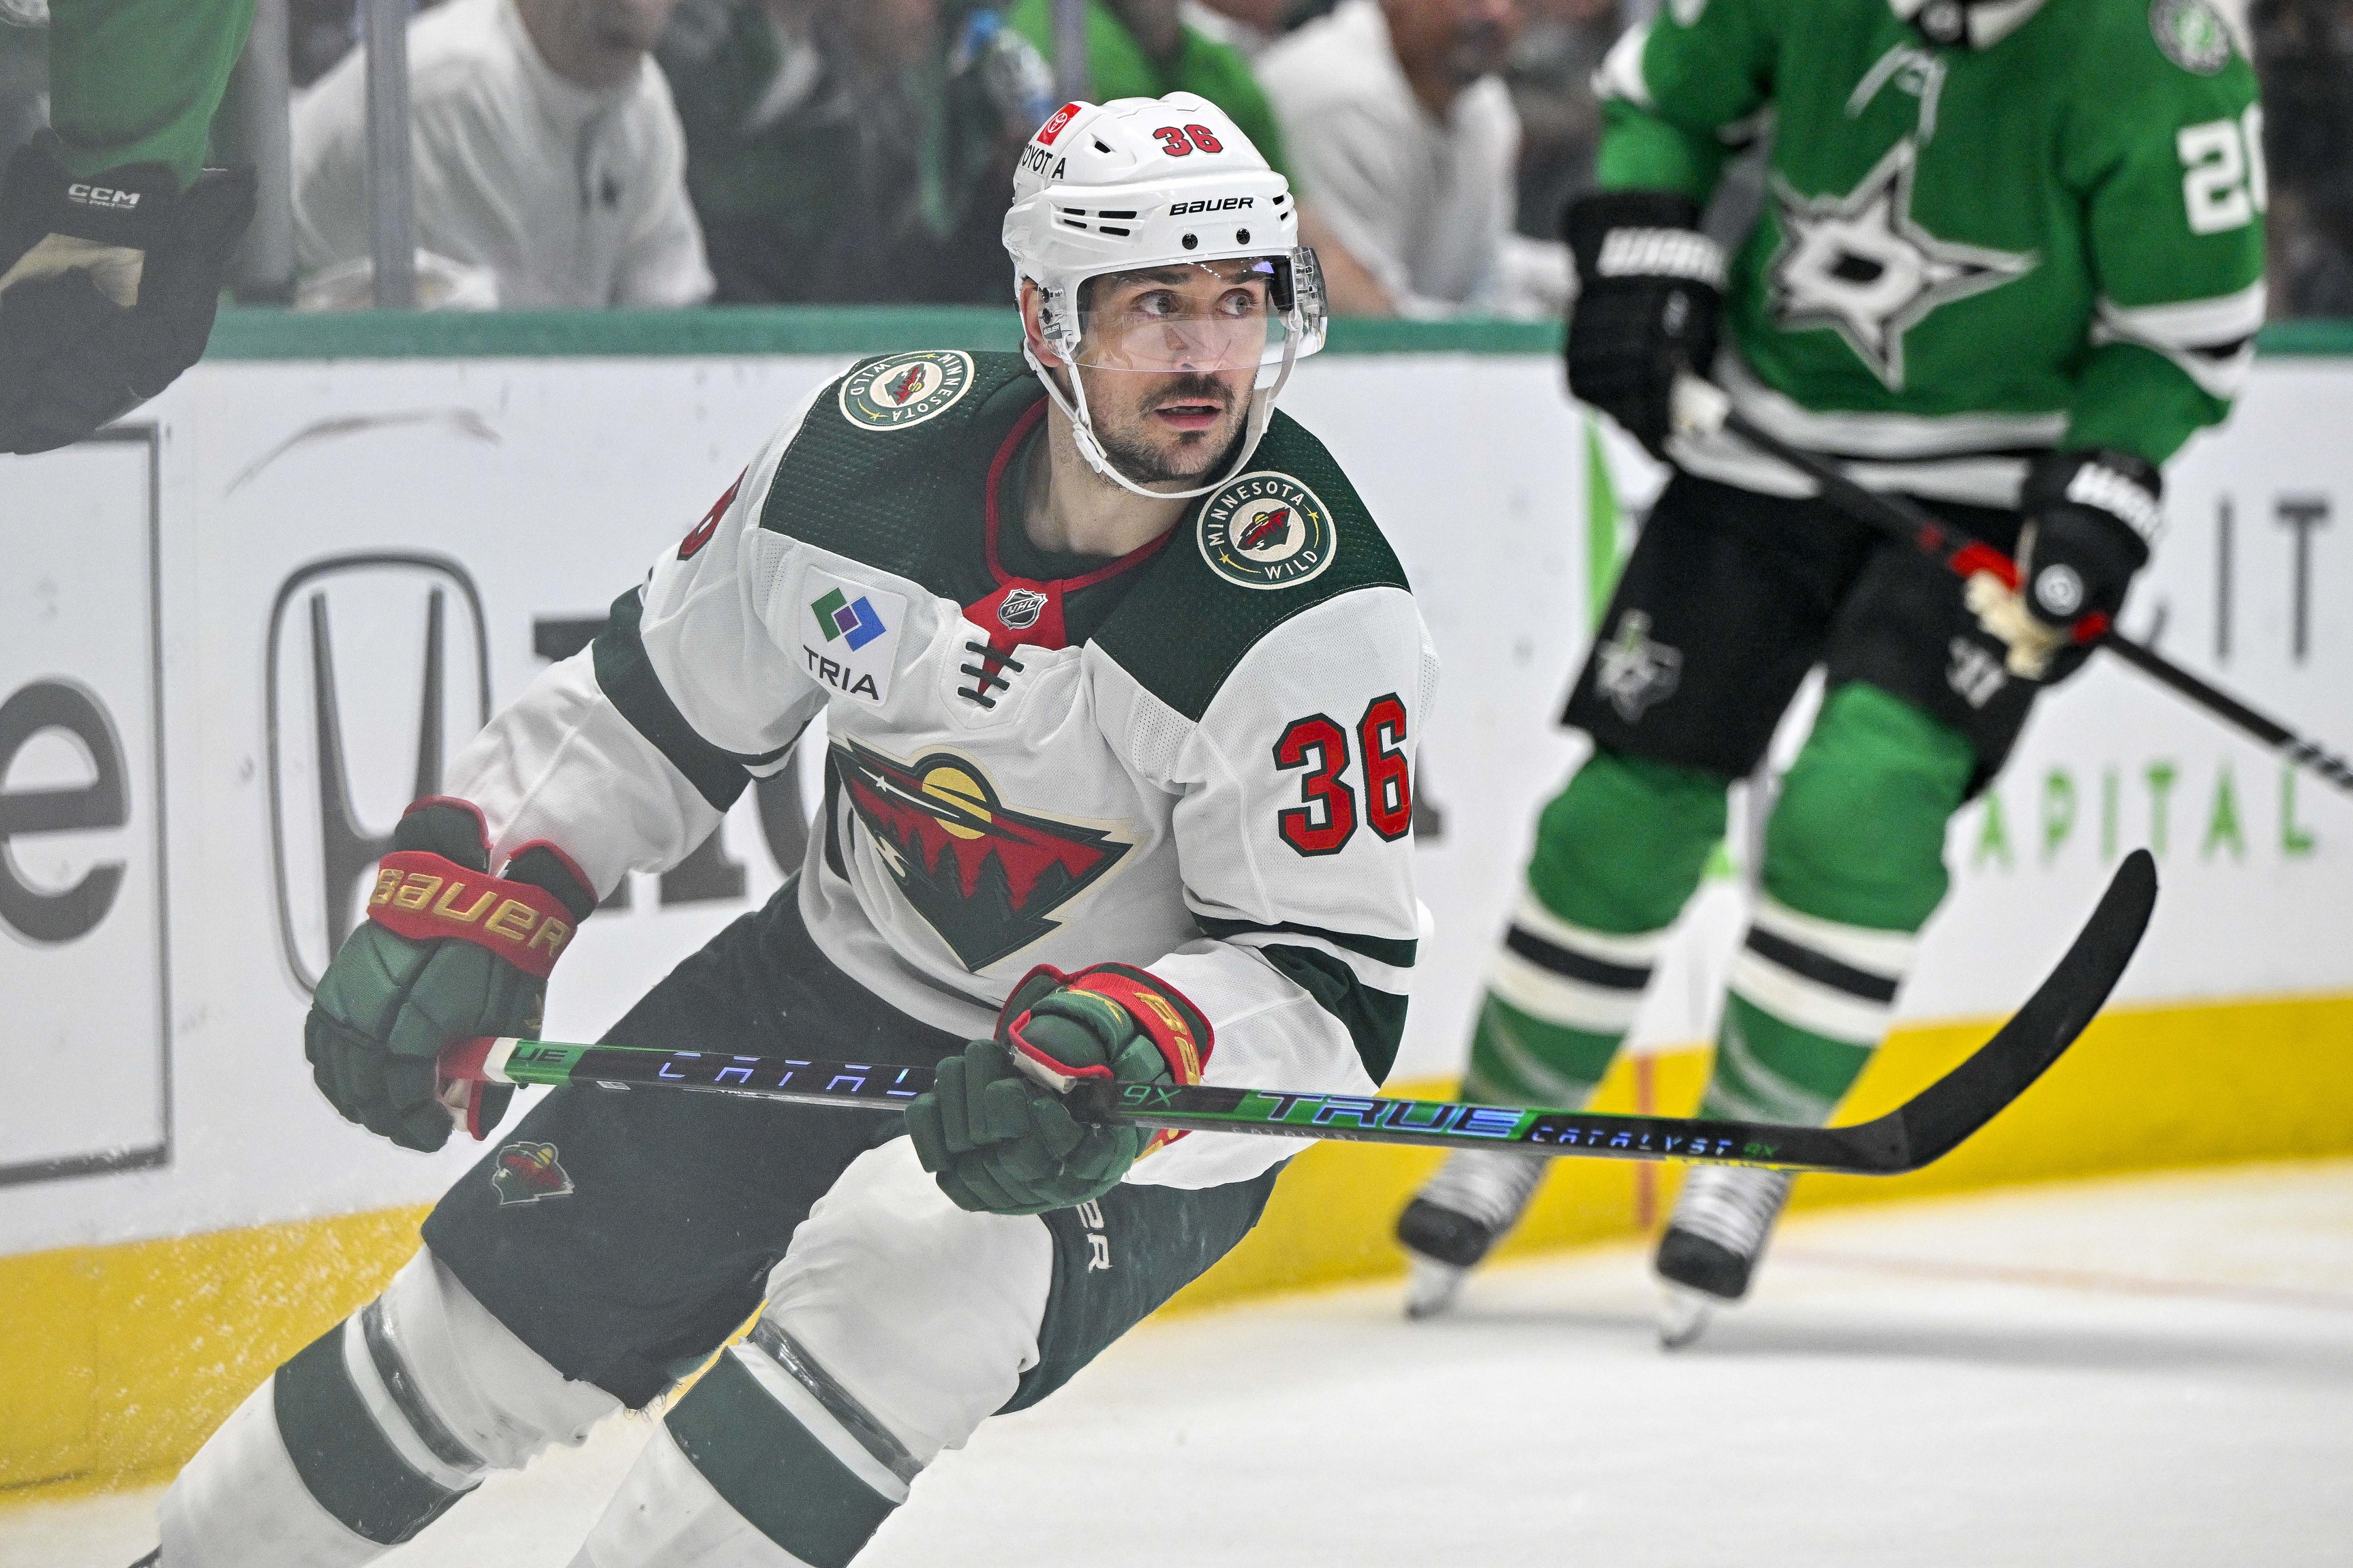 Minnesota Wild: What's in store for Mats Zuccarello this season?